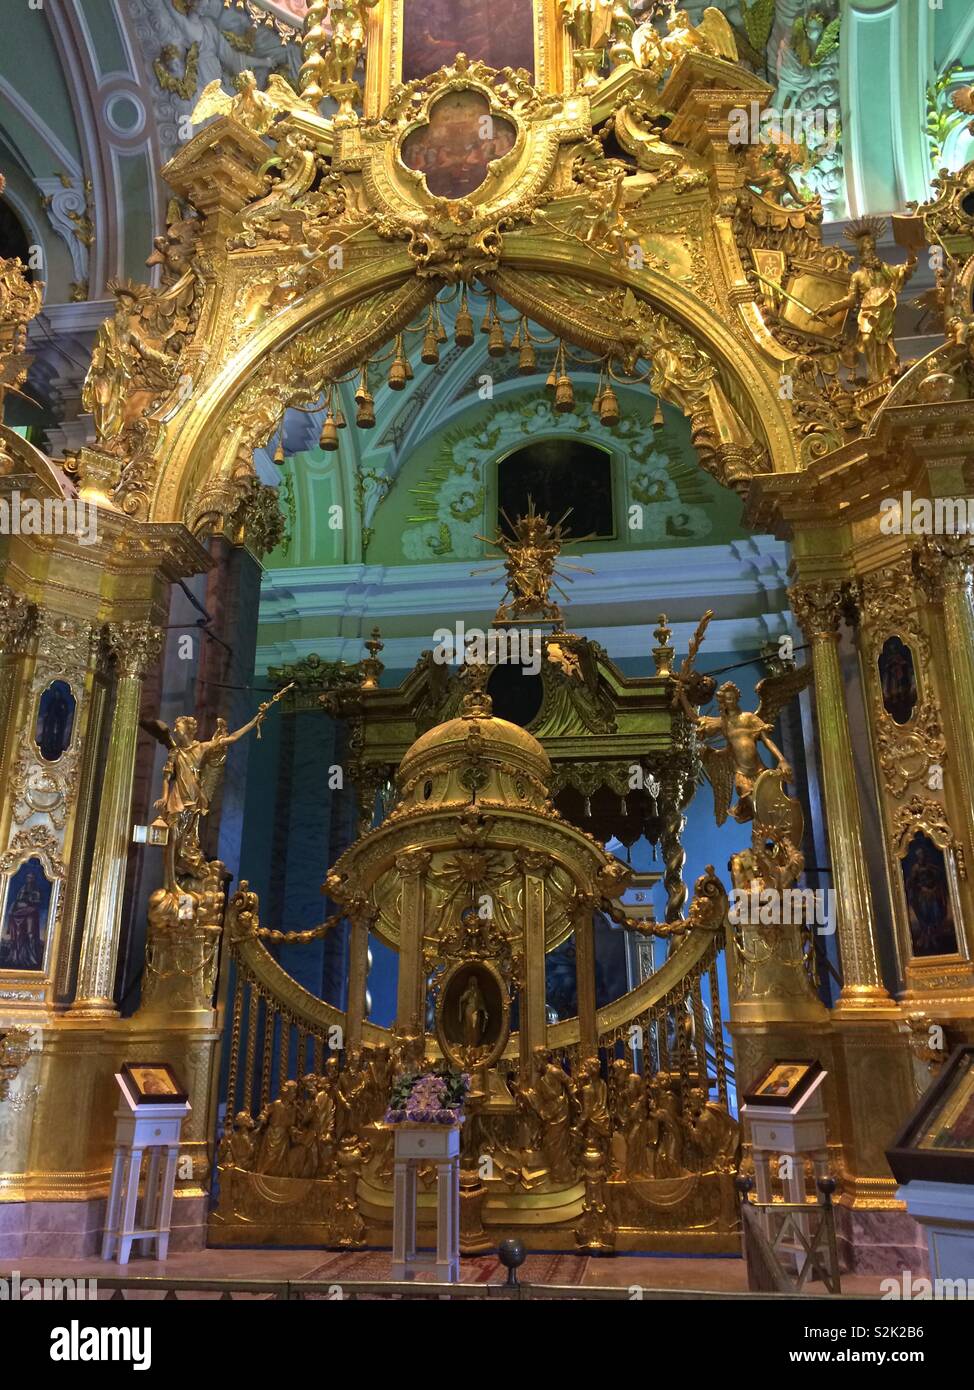 Gold high altar inside the Russian orthodox cathedral in Peter and Paul fortress in St. Petersburg Russia Stock Photo